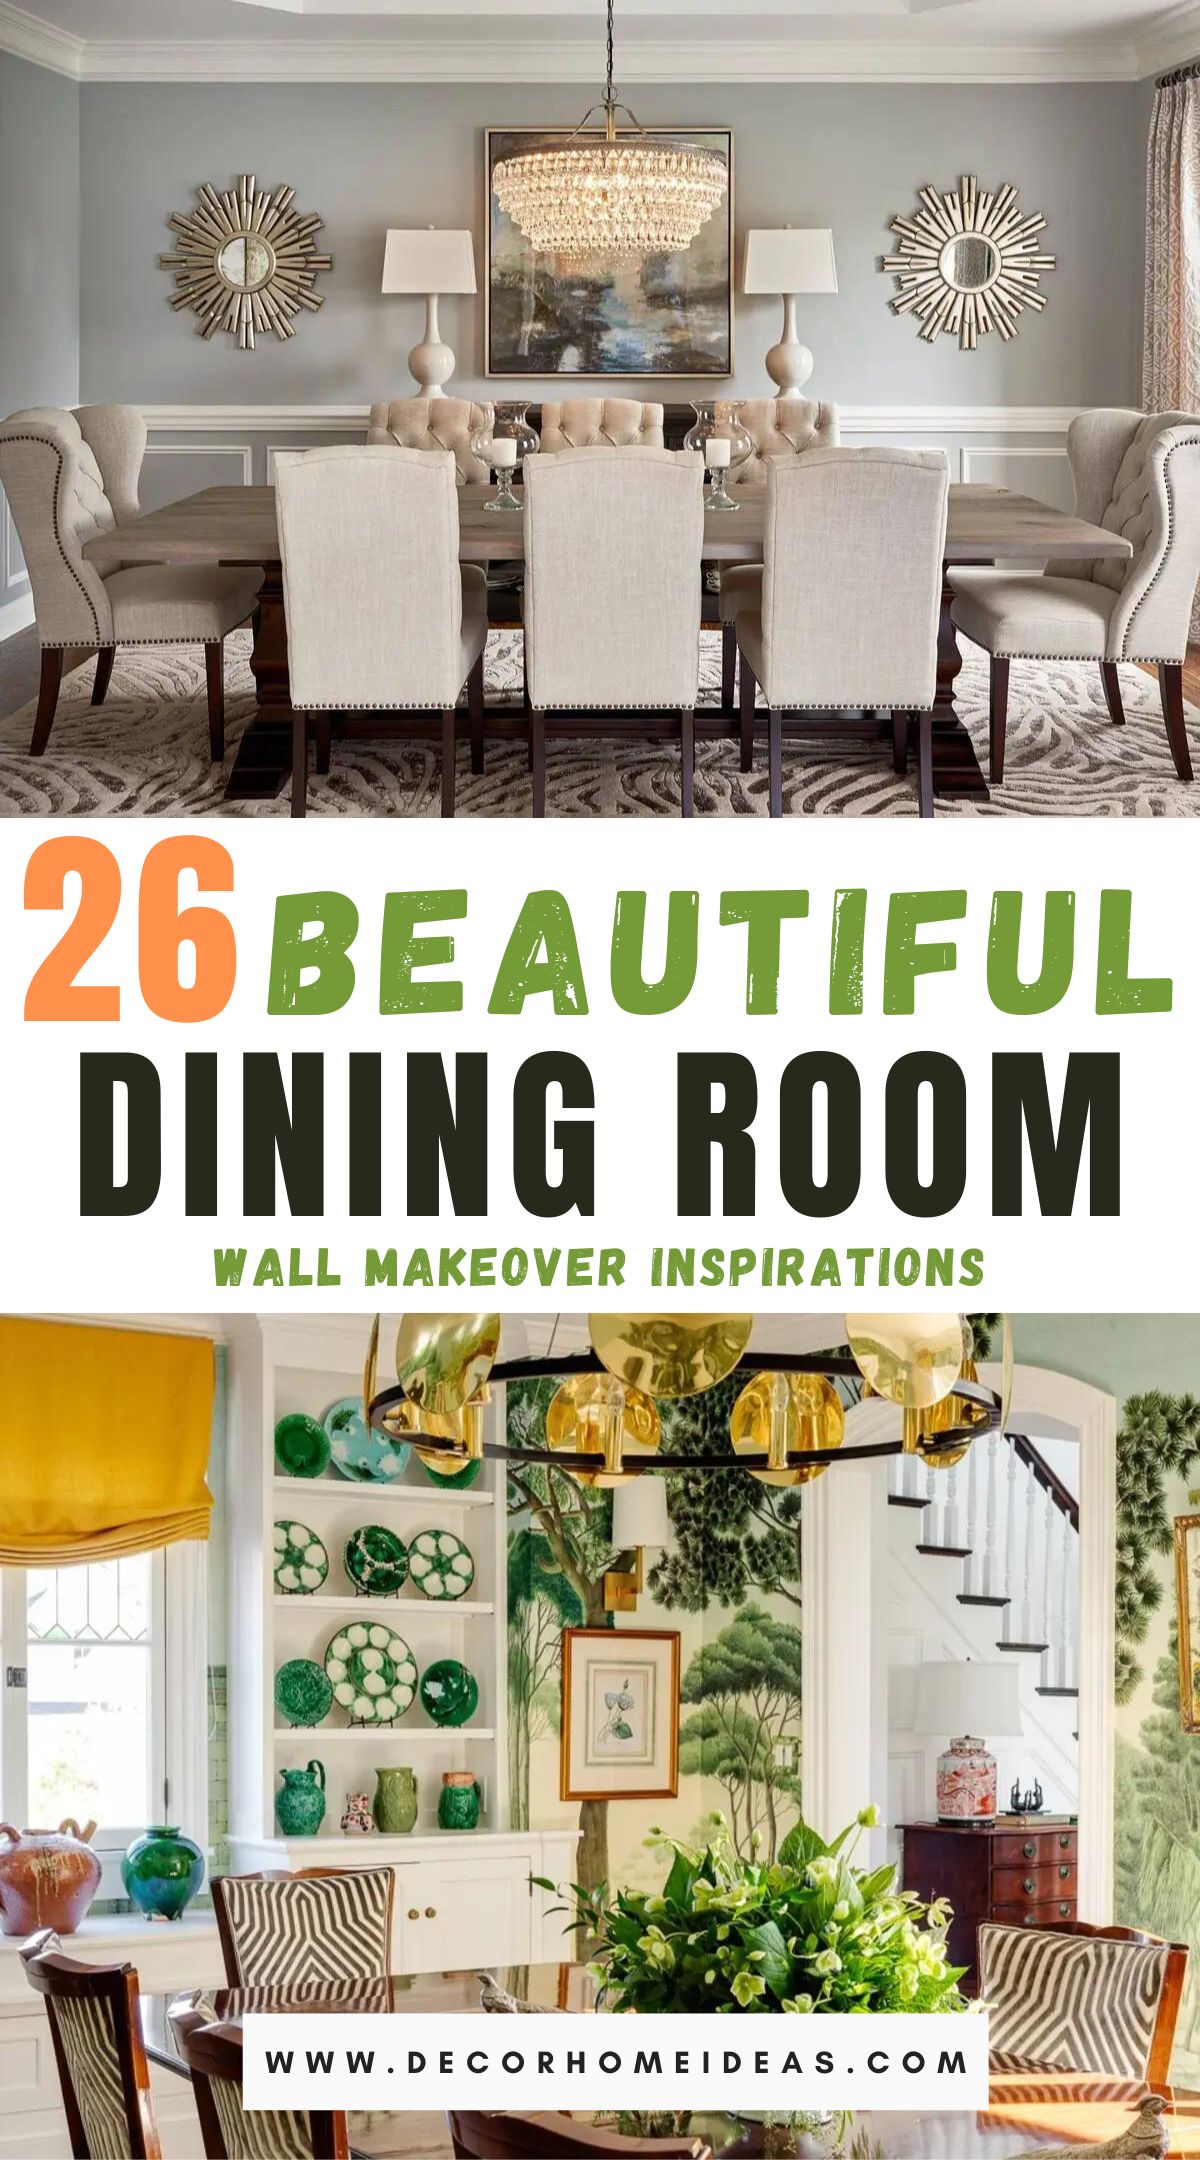 Best Dining Room Wall Decor Ideas and Designs